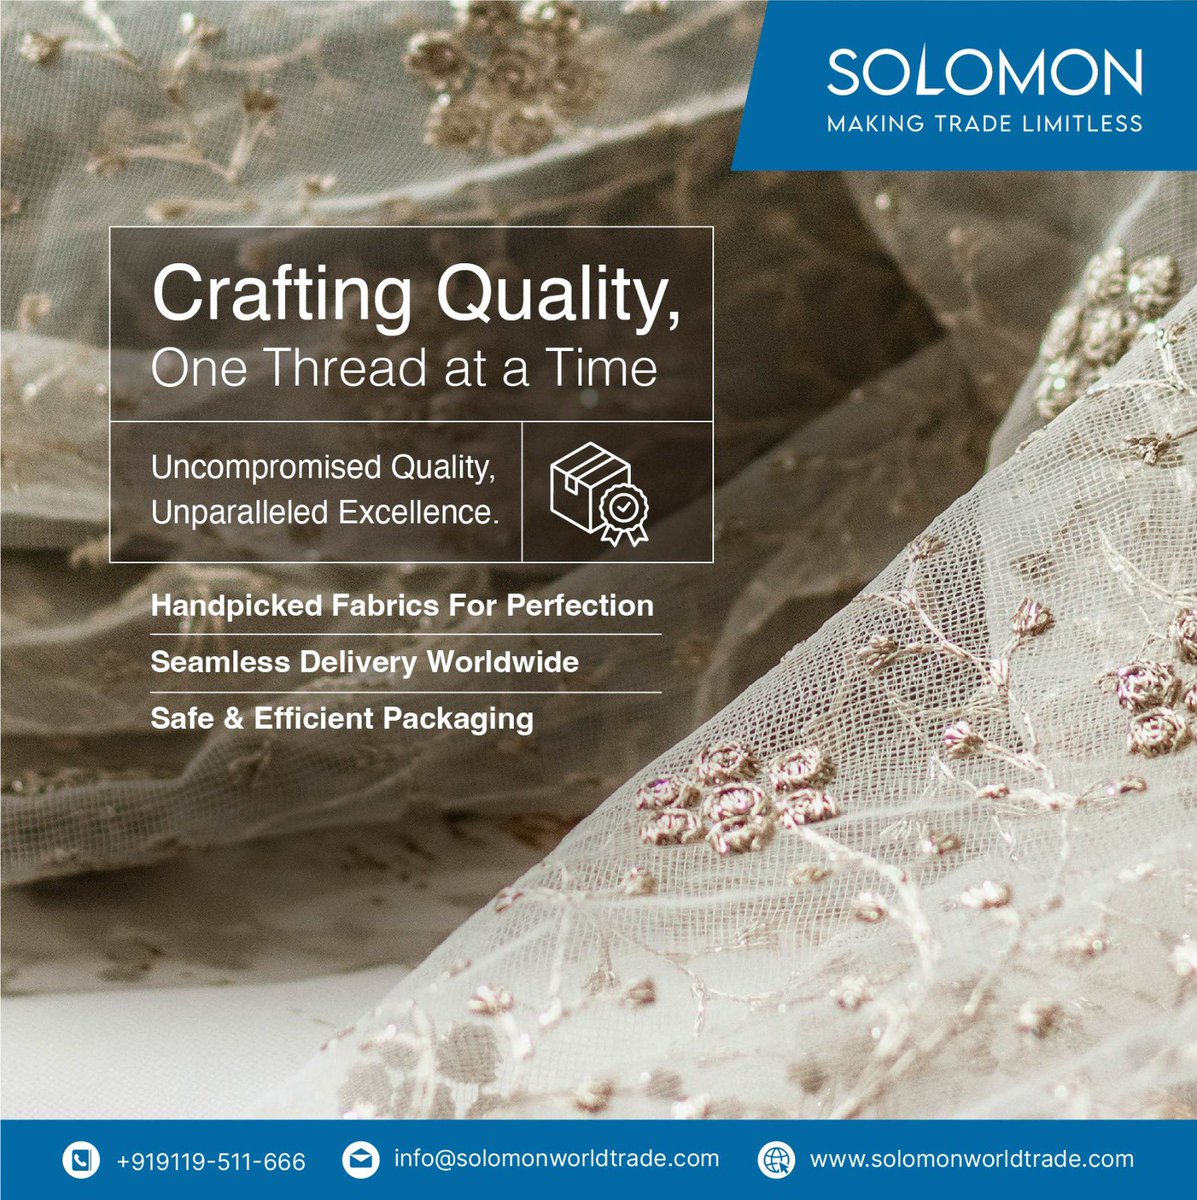 Weaving threads of quality with utmost perfection.

Experience best quality products and top-notch delivery experience with Solomon Trading Company.
#SolomonTradingCompany  #ExportingWorldwide #BedLinens